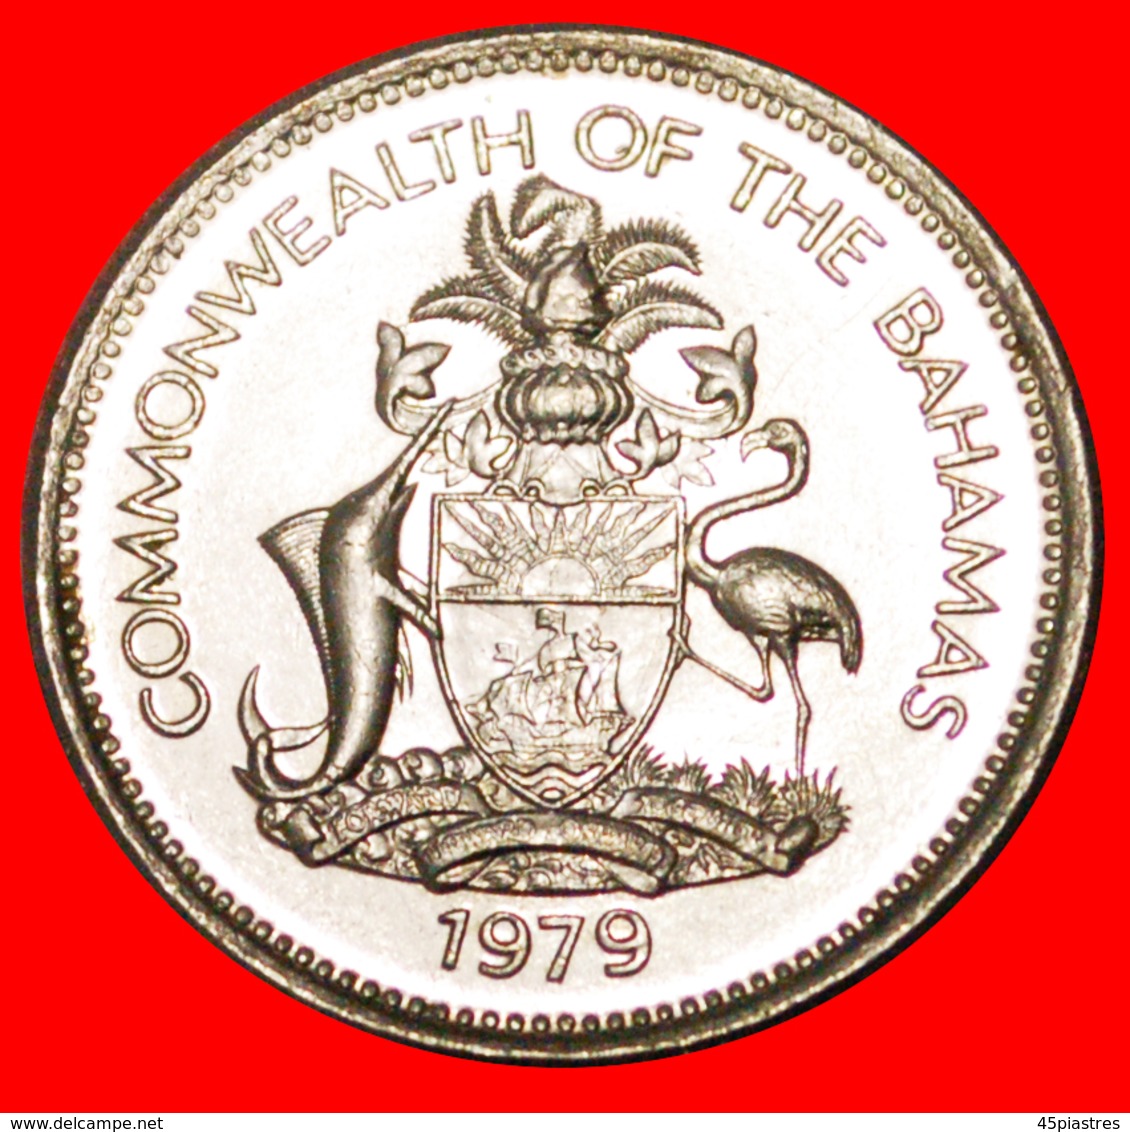 # GREAT BRITAIN: THE BAHAMAS ★ 25 CENTS 1979 SHIP MINT LUSTER! LOW START ★ NO RESERVE! - Bahama's